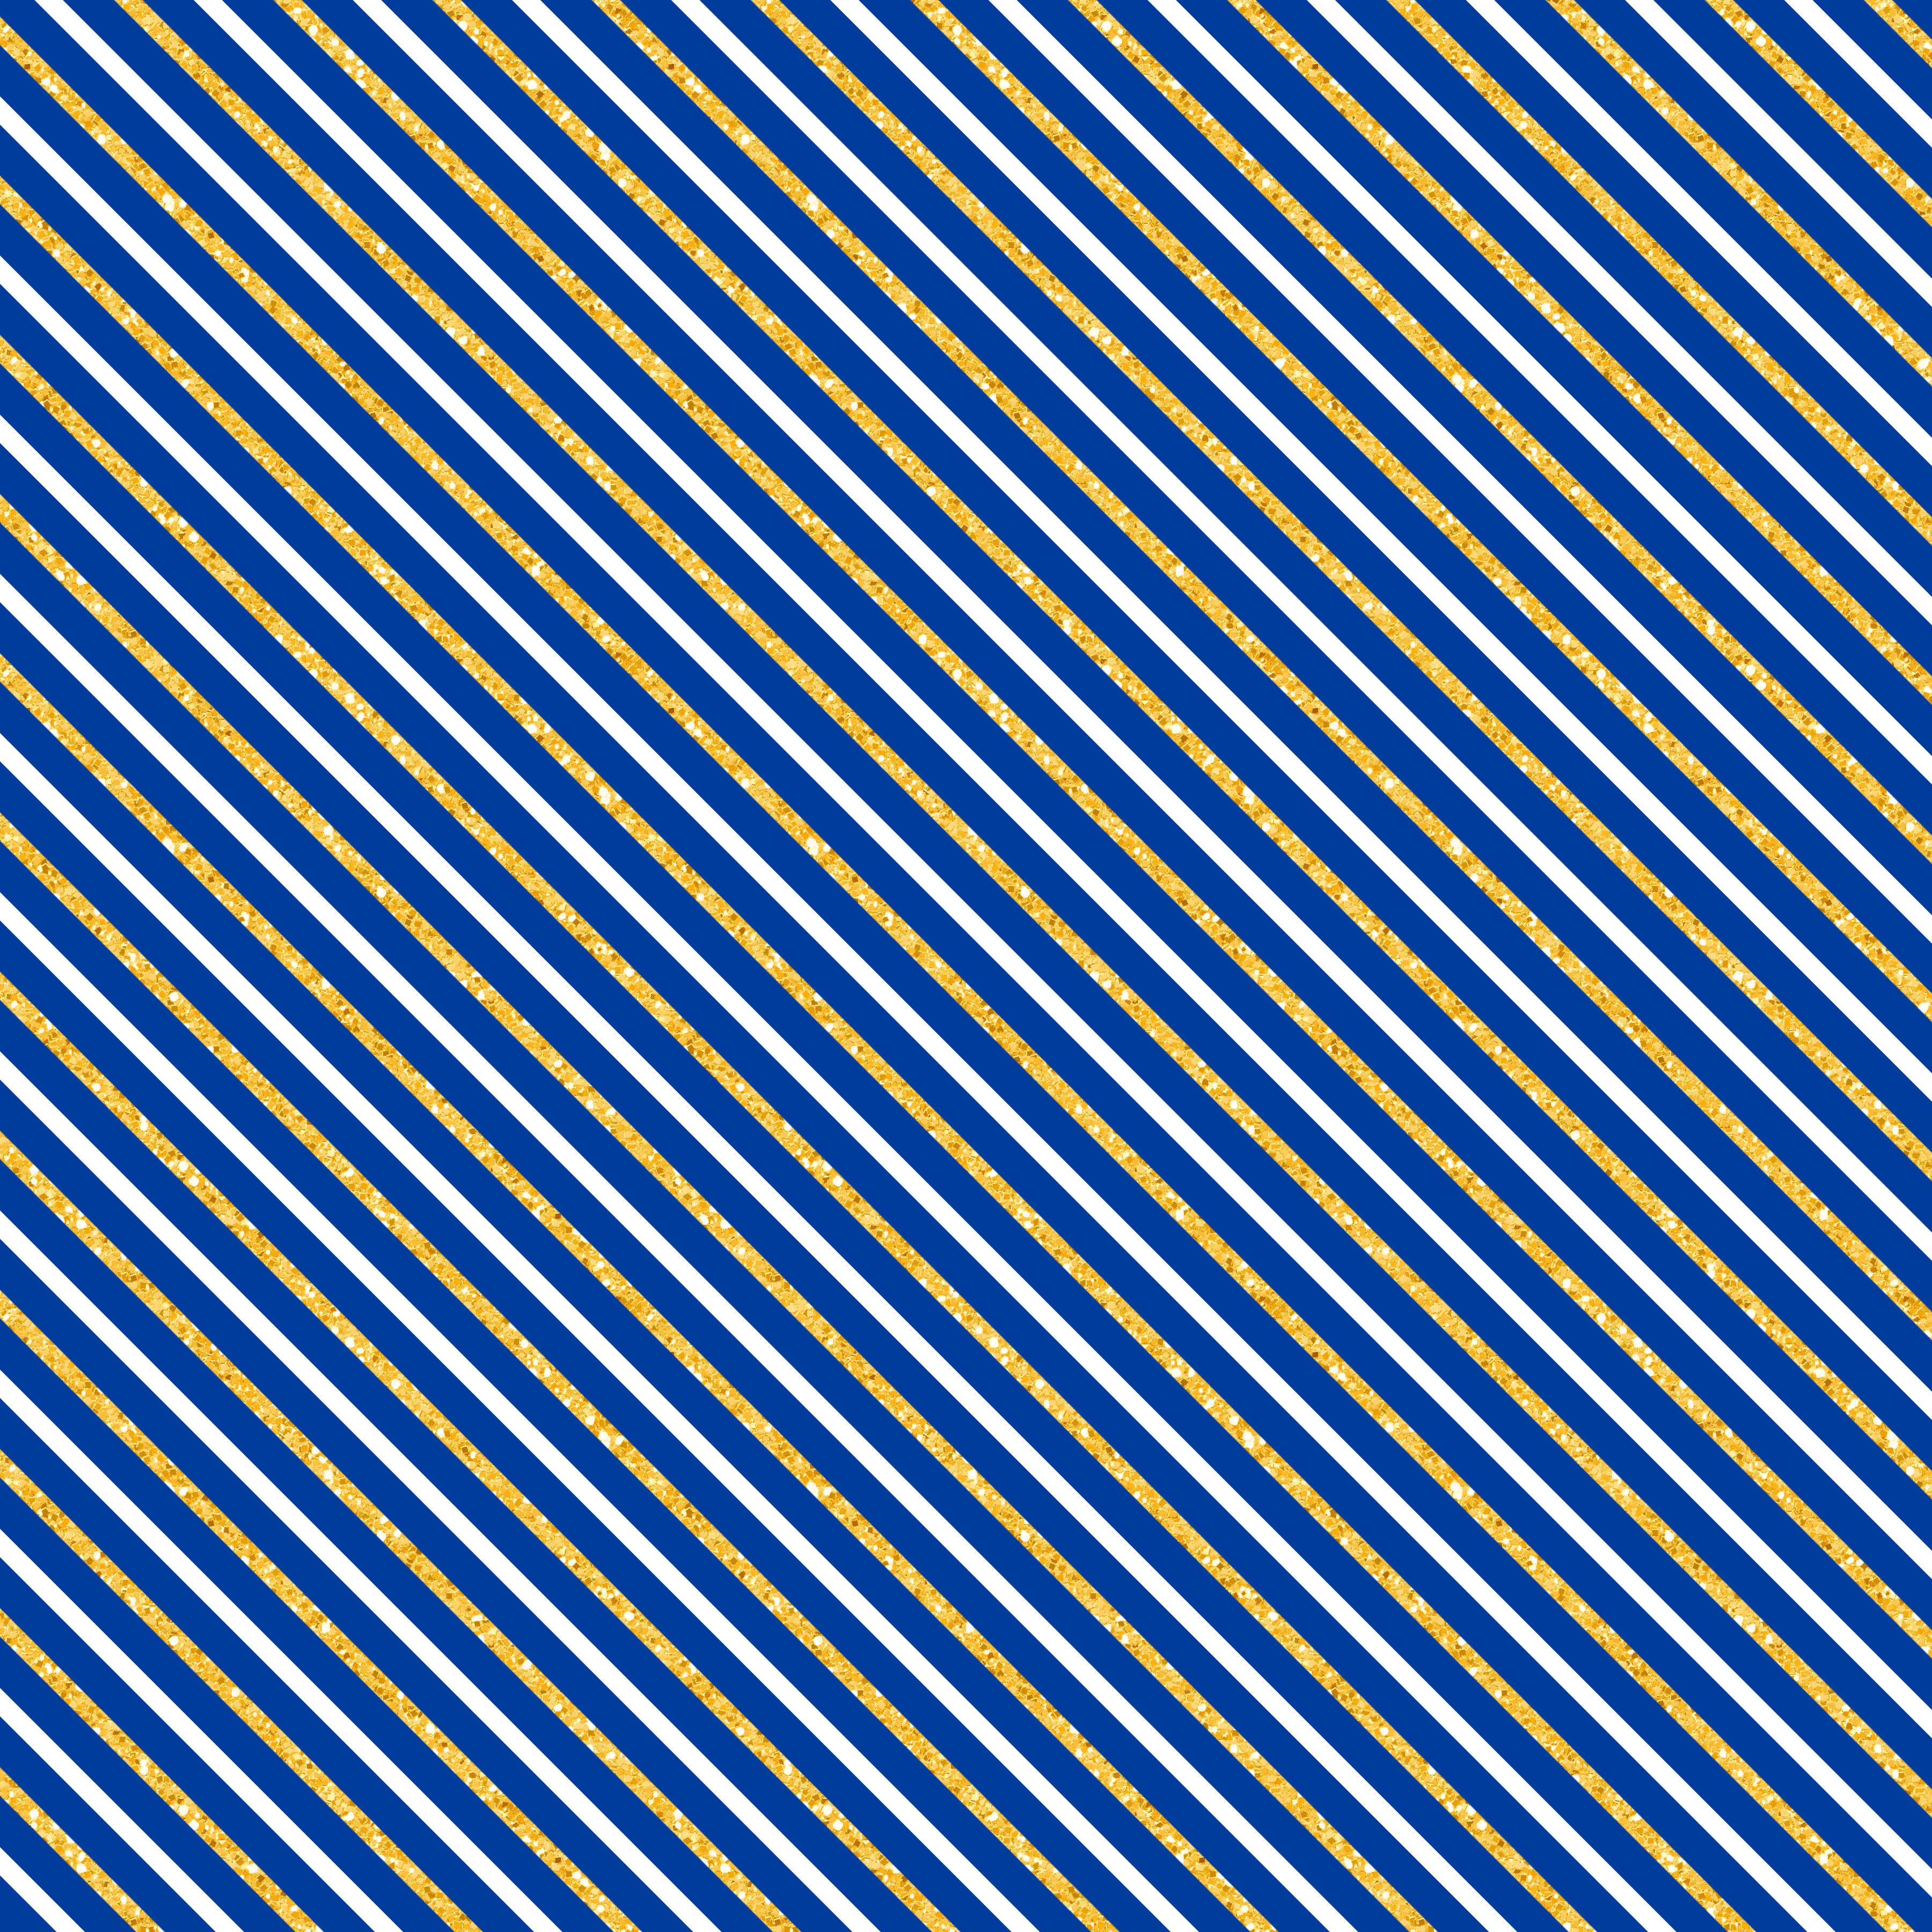 Yellow and Blue Diagonal Stripes Patterned Vinyl 12" x 12" - The Vinyl Haus